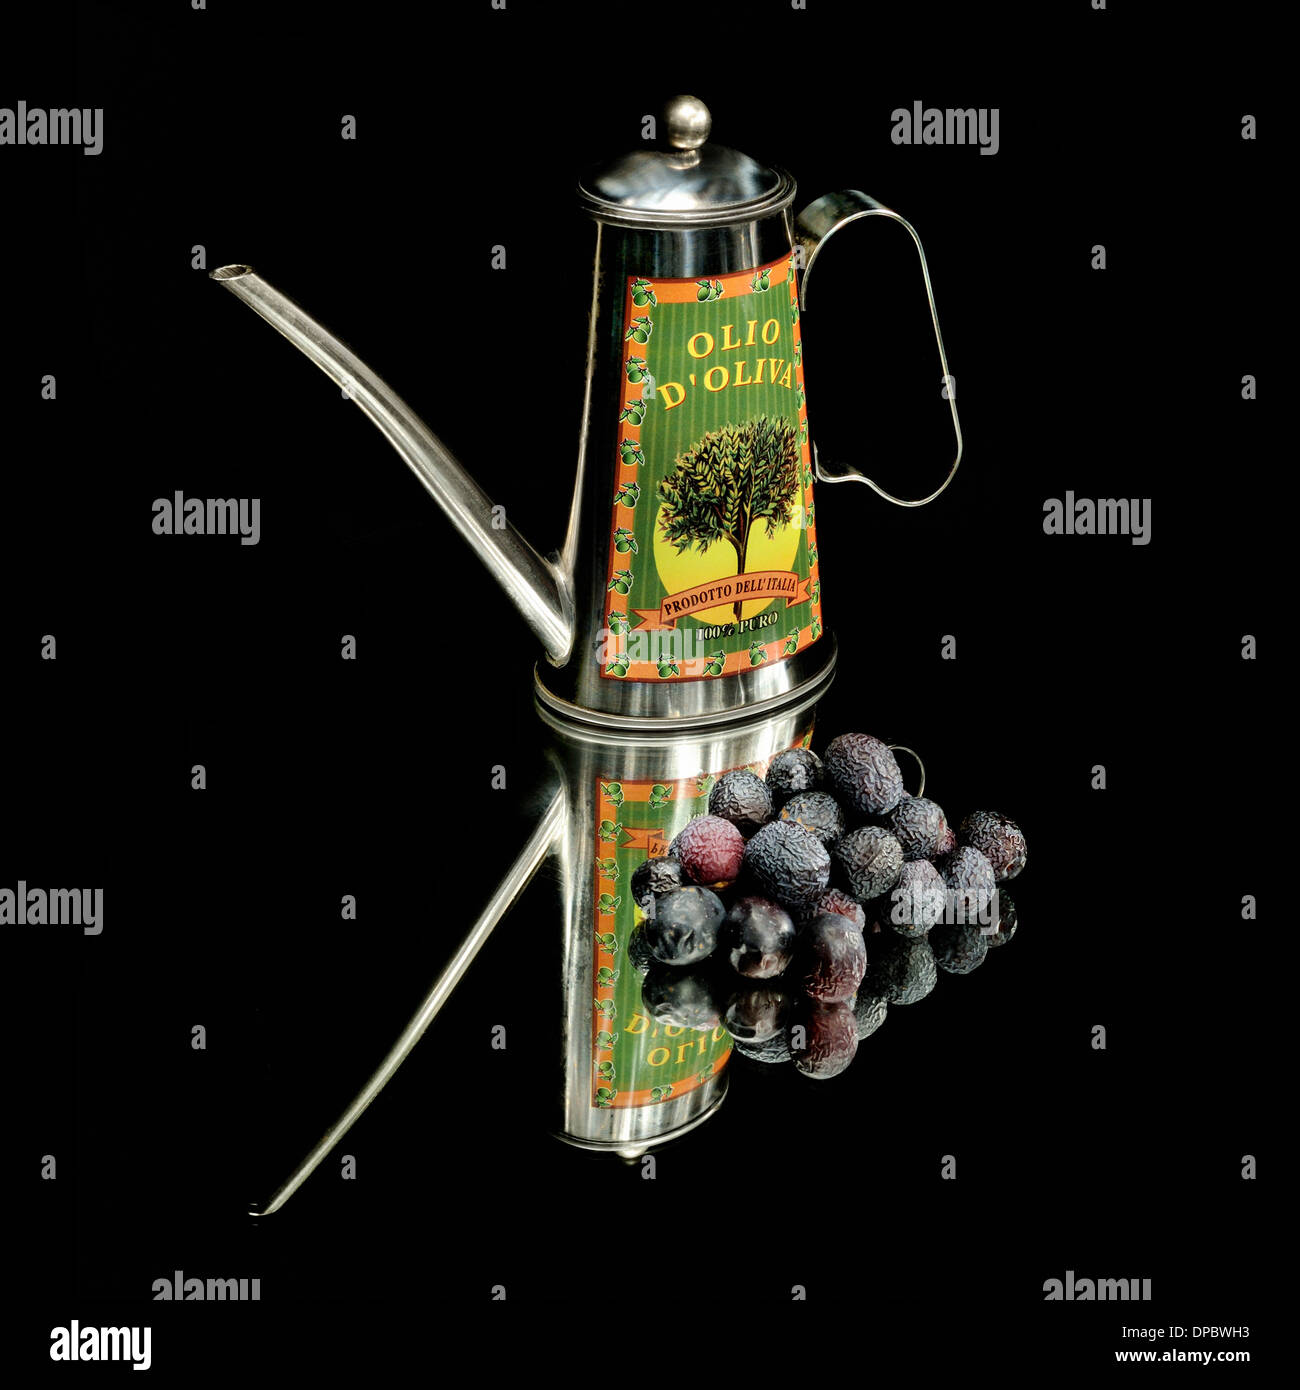 Black Olives with Oil Can on mirror and black background. Stock Photo